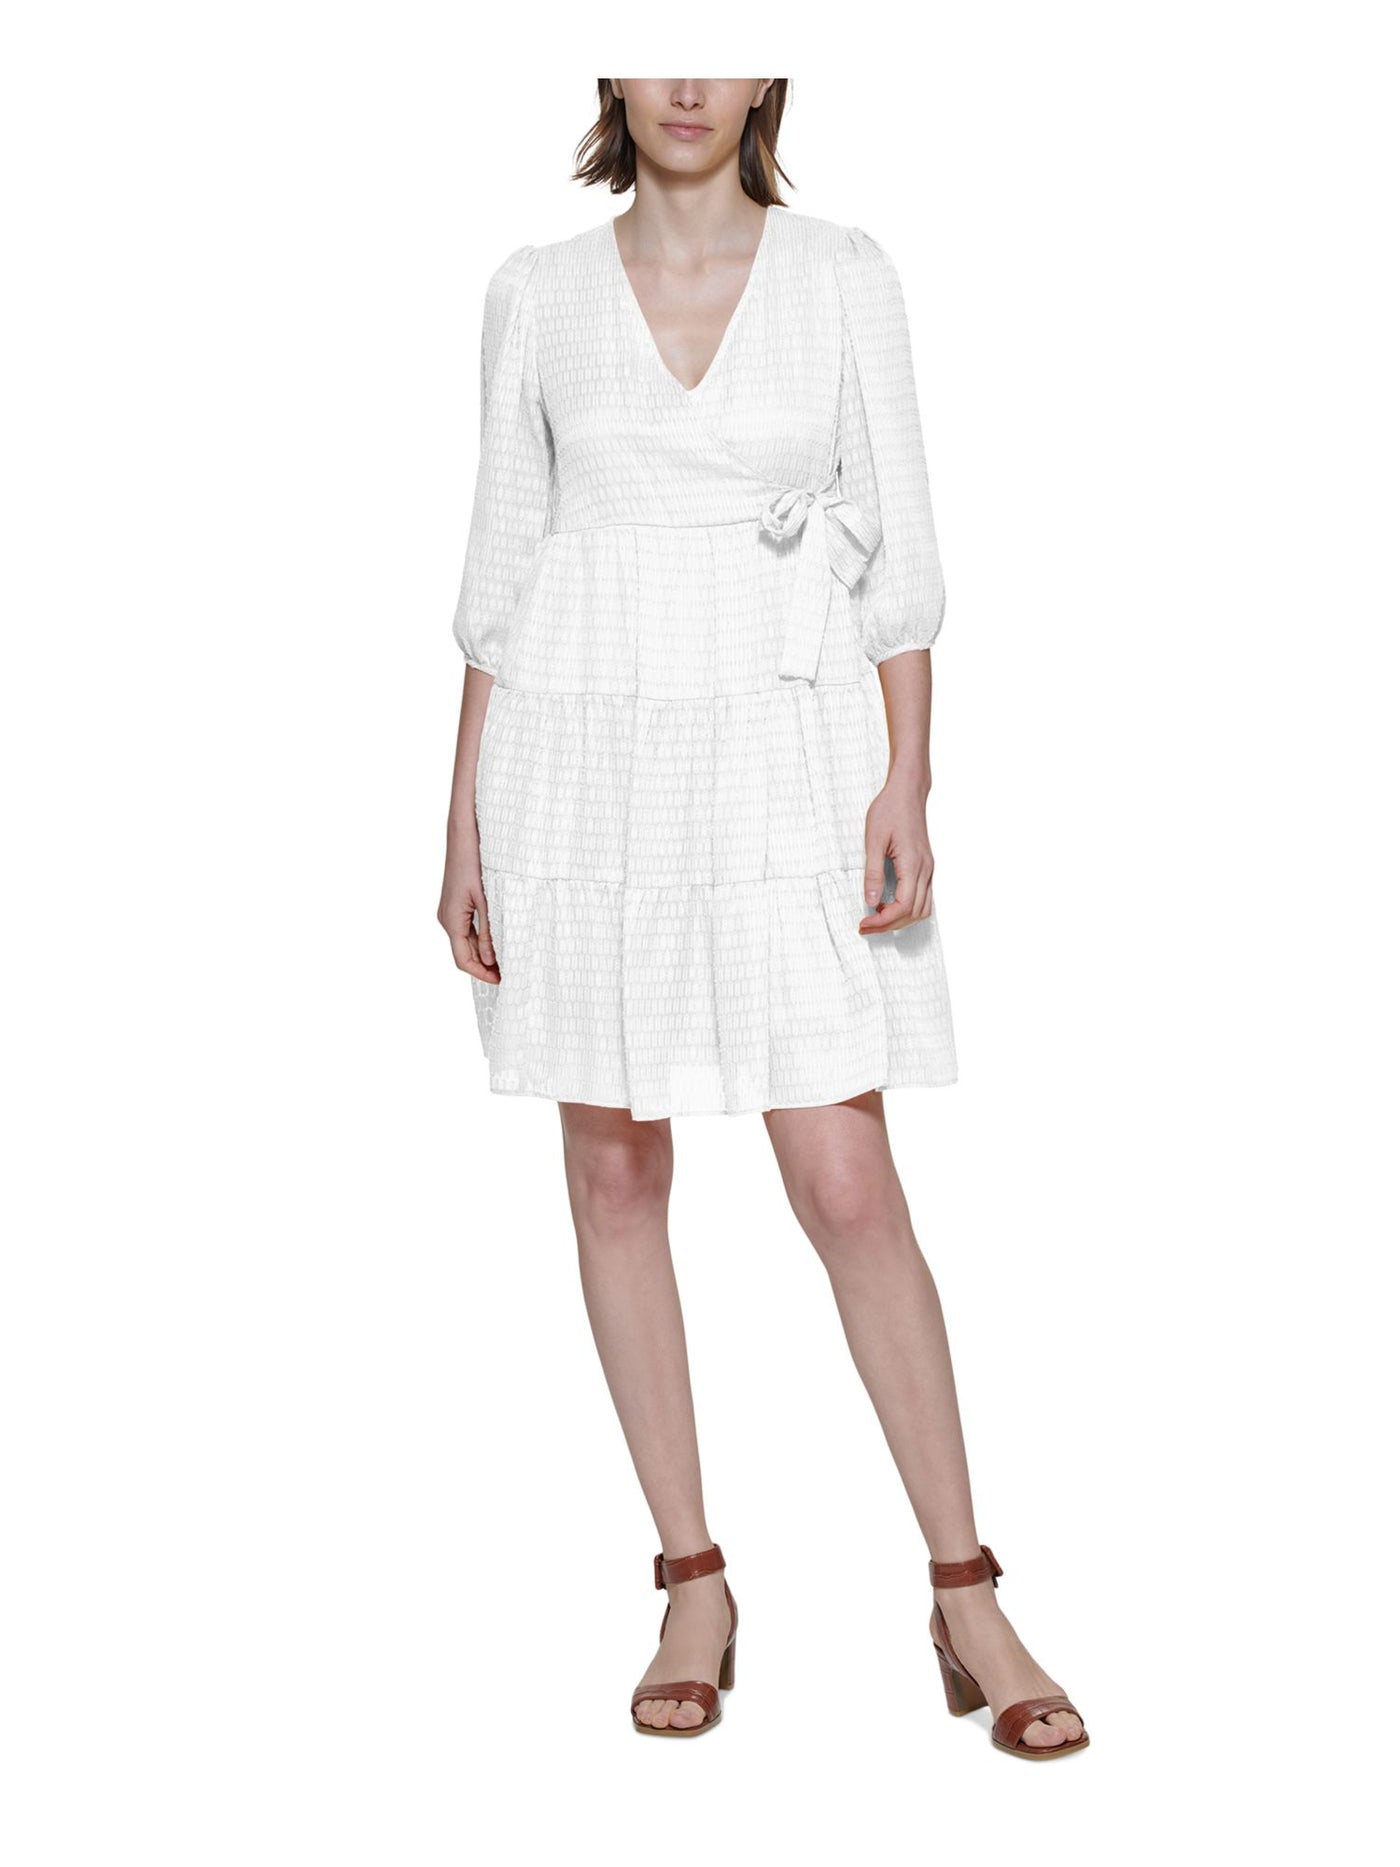 CALVIN KLEIN Womens White Sheer Metallic Tie Faux-wrap Styling Tiered 3/4 Sleeve V Neck Above The Knee A-Line Dress 14